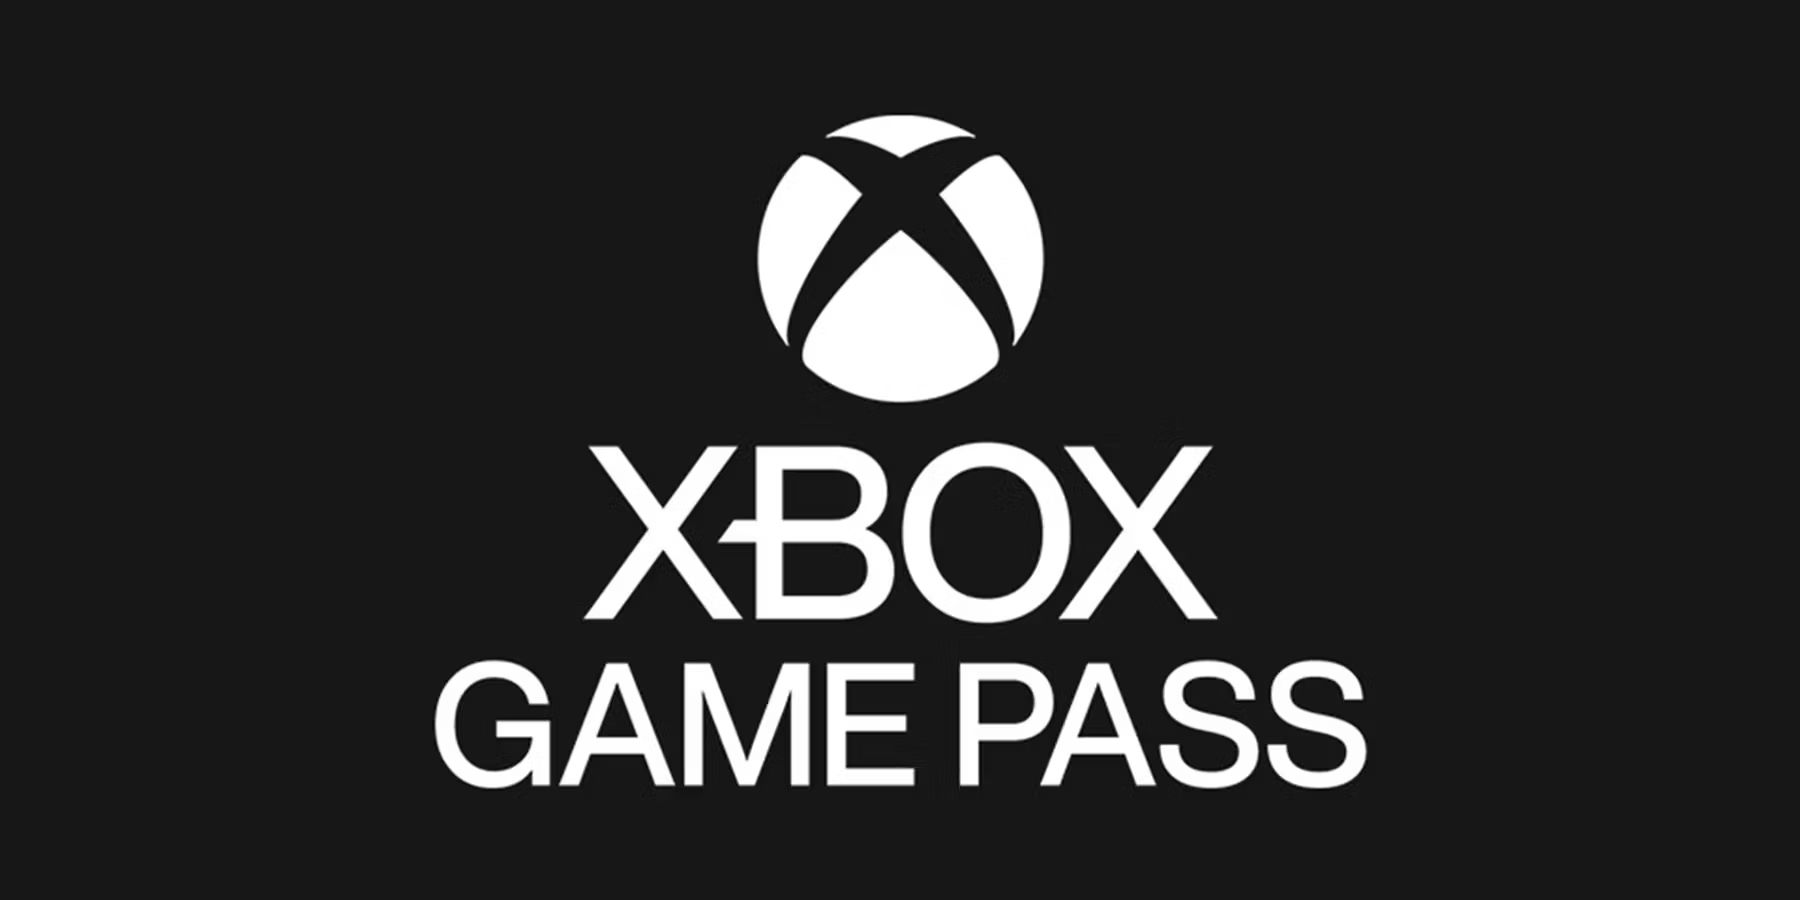 Xbox Game Pass Confirms Day One Game for April 16